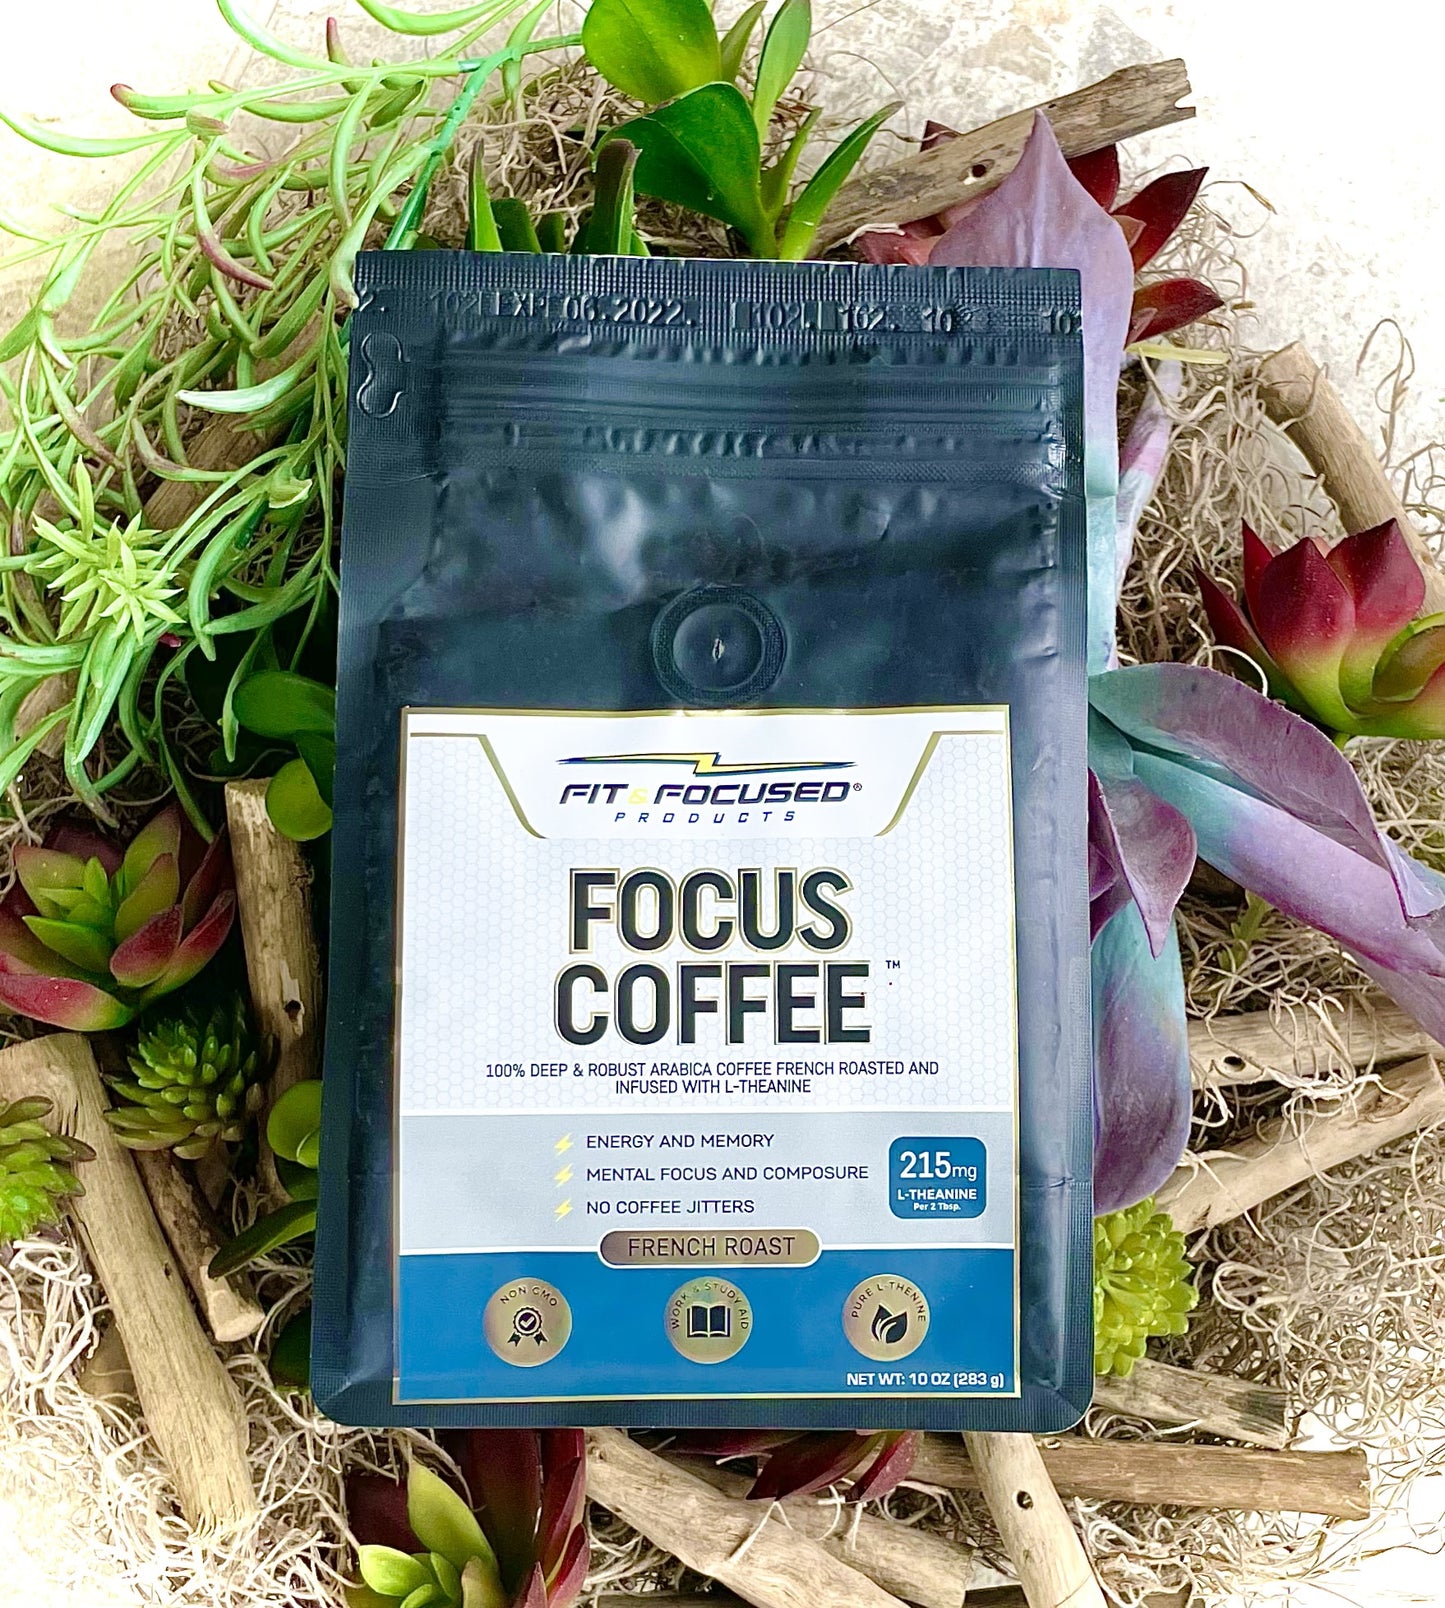 L-Theanine Infused Focus Coffee Laying In A Bouquet Of Plants Such As Green Tea Leaves